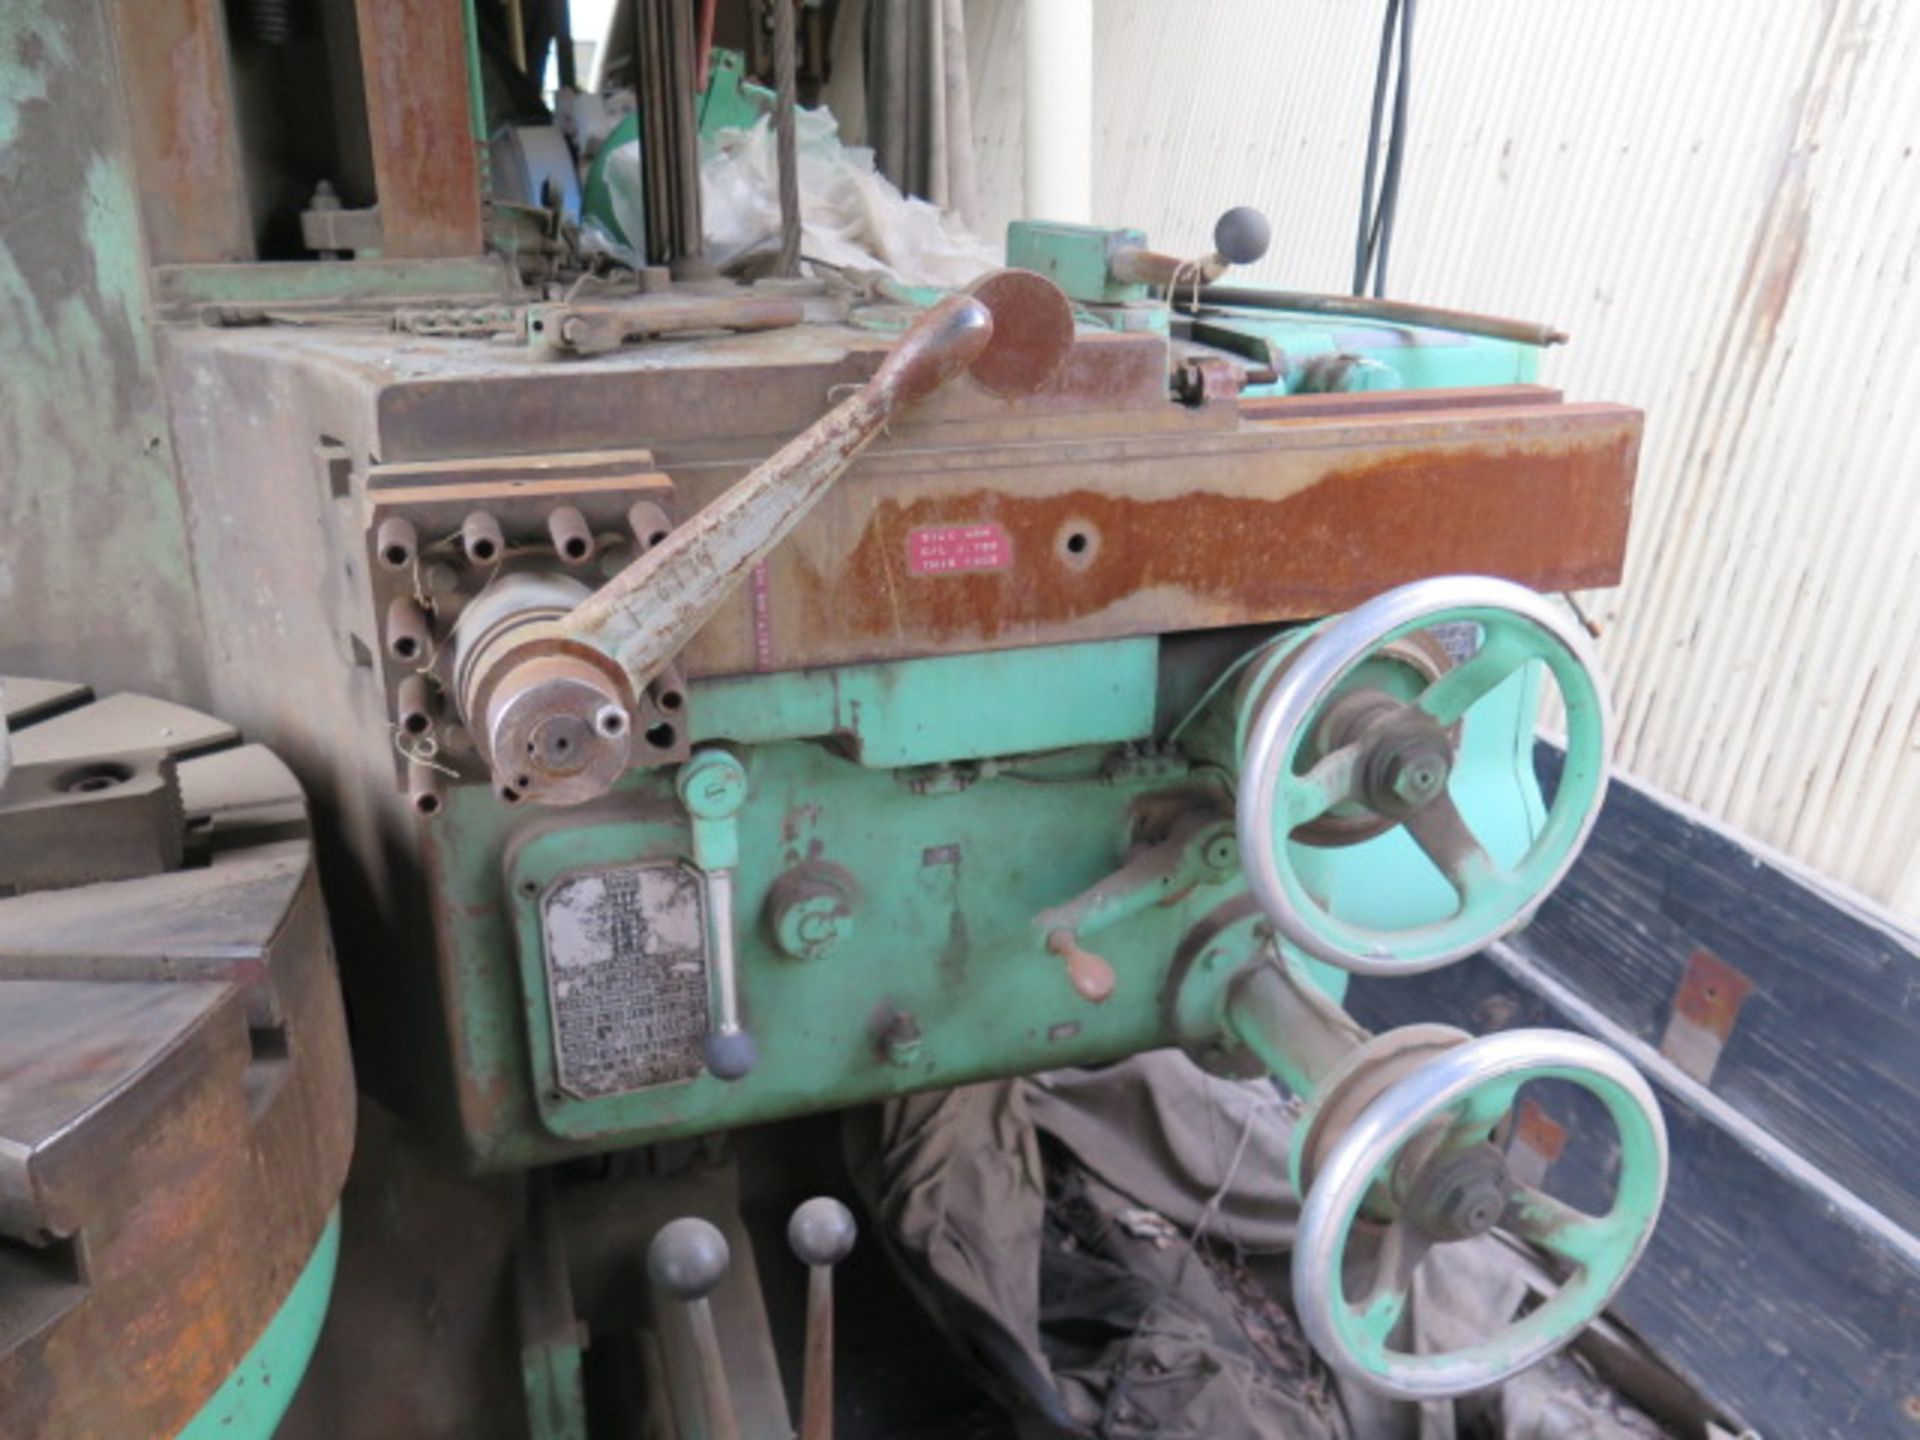 King 36" Vertical Turret Lathe s/n 2615 w/ 5-Station Indexing Head, Facing / Turning Head,SOLD AS IS - Image 8 of 14